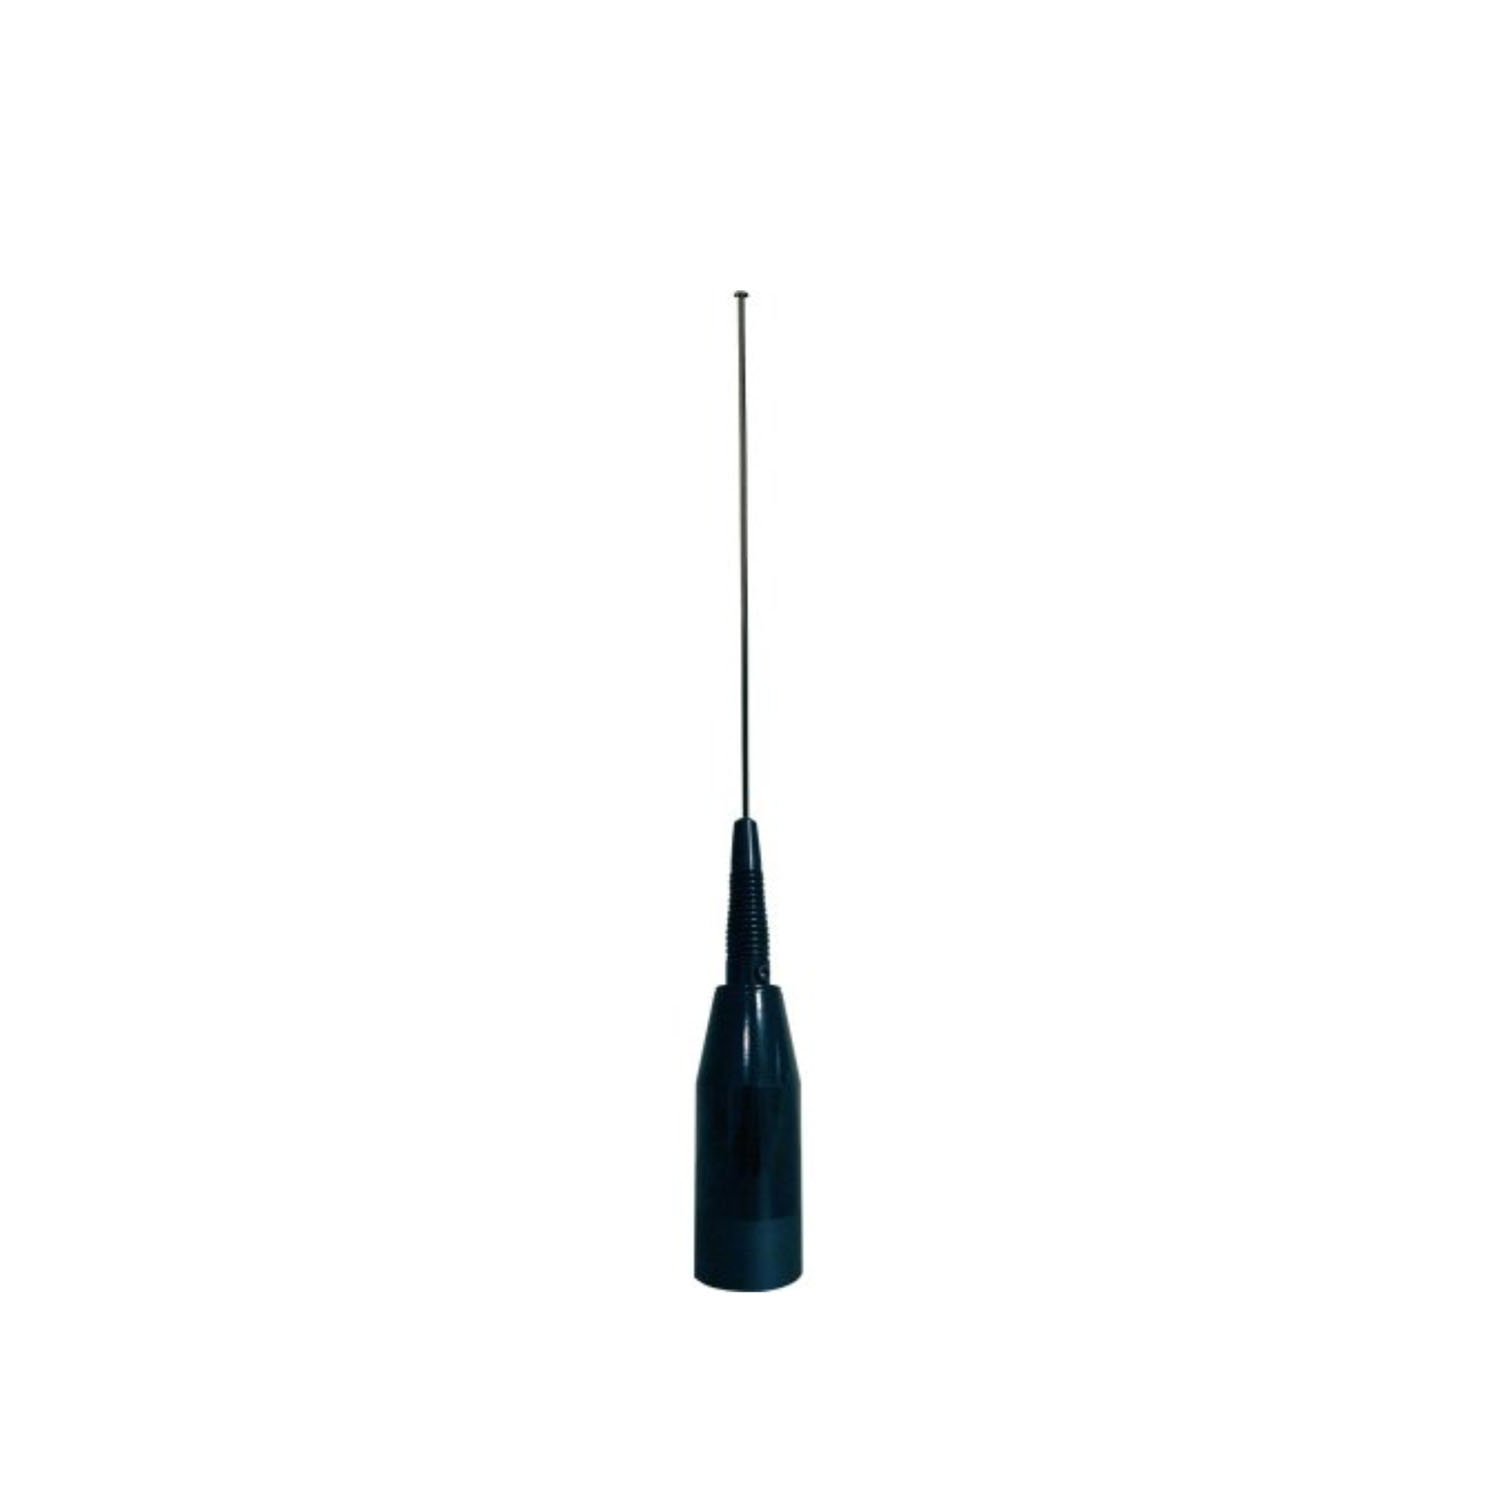 PCTEL - PCTWSLMR MULTI-BAND NMO STYLE ANTENNA FOR 134-174, 380-520 & 698-960 MHz FREQUENCIES